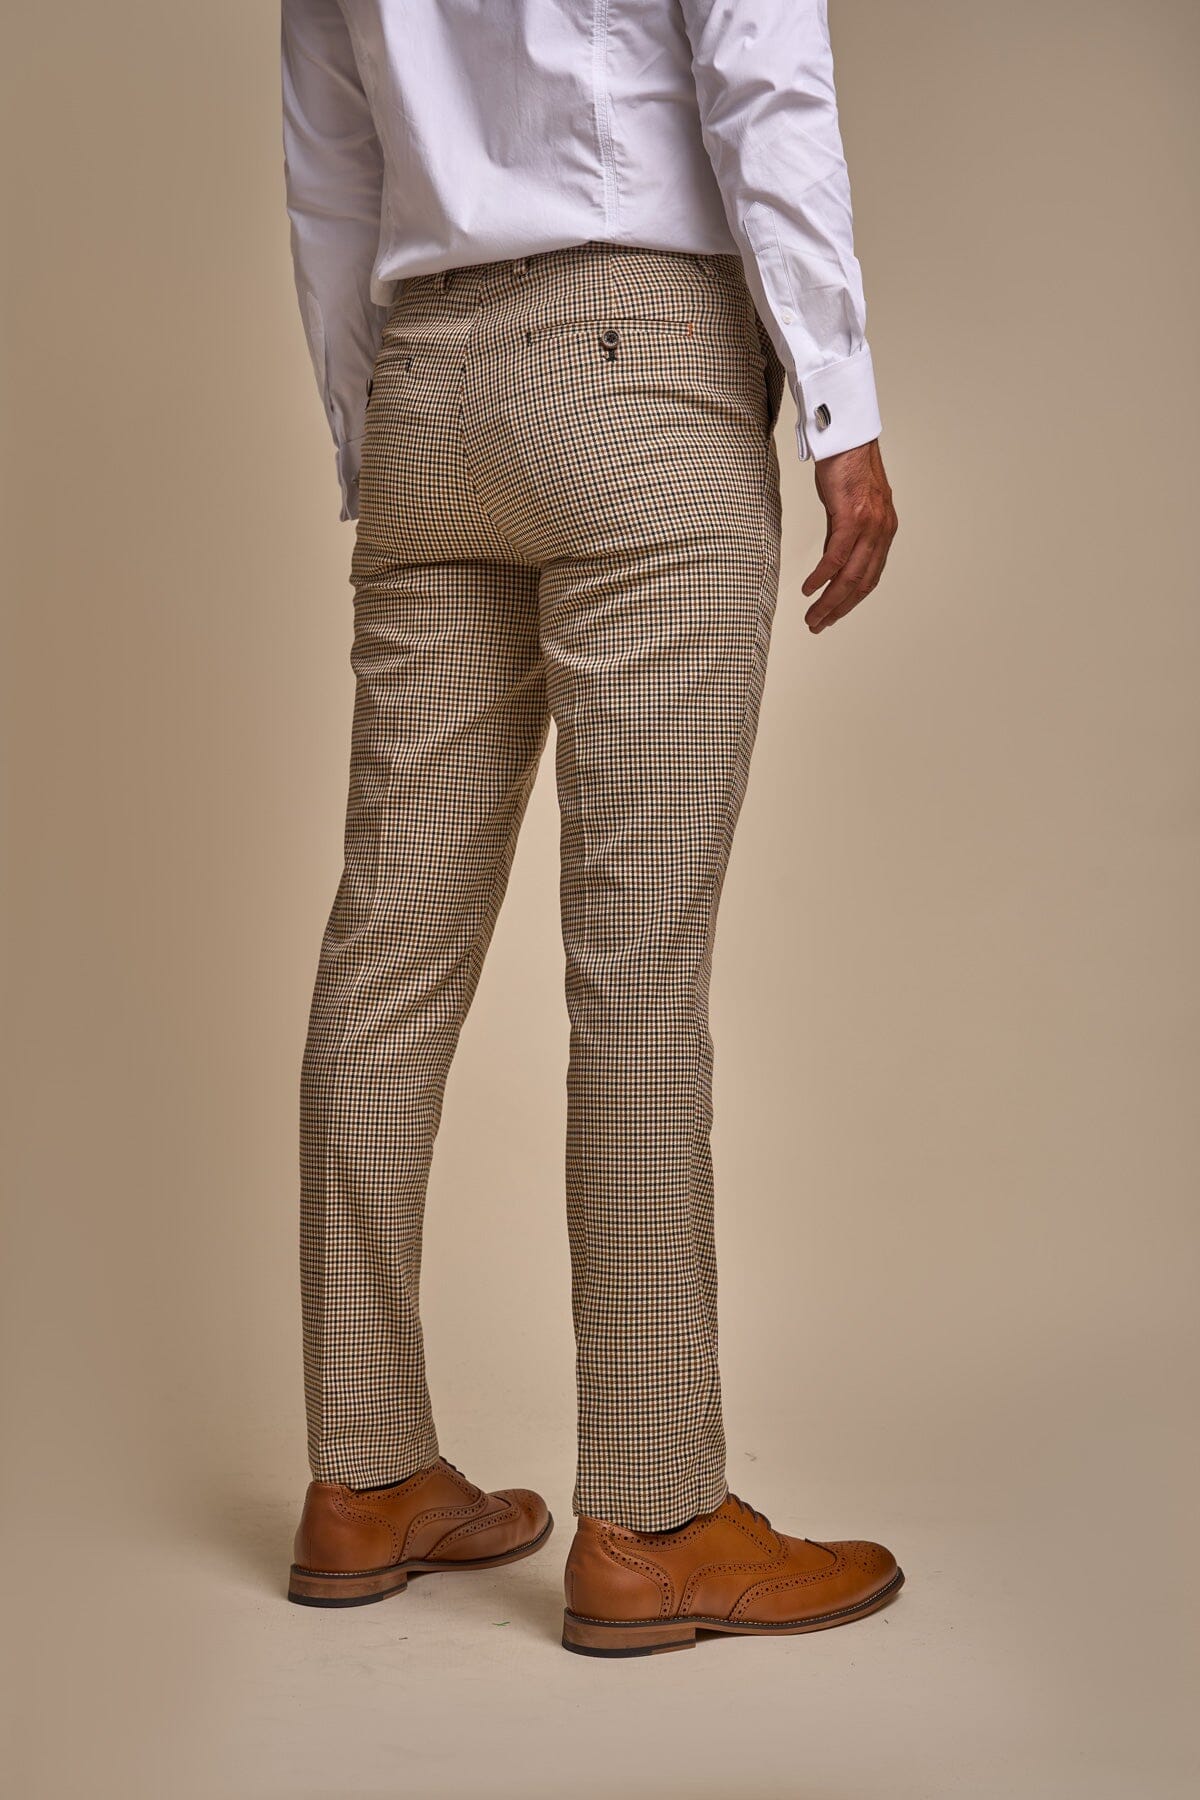 Elwood Houndstooth Check Trousers - Trousers - 